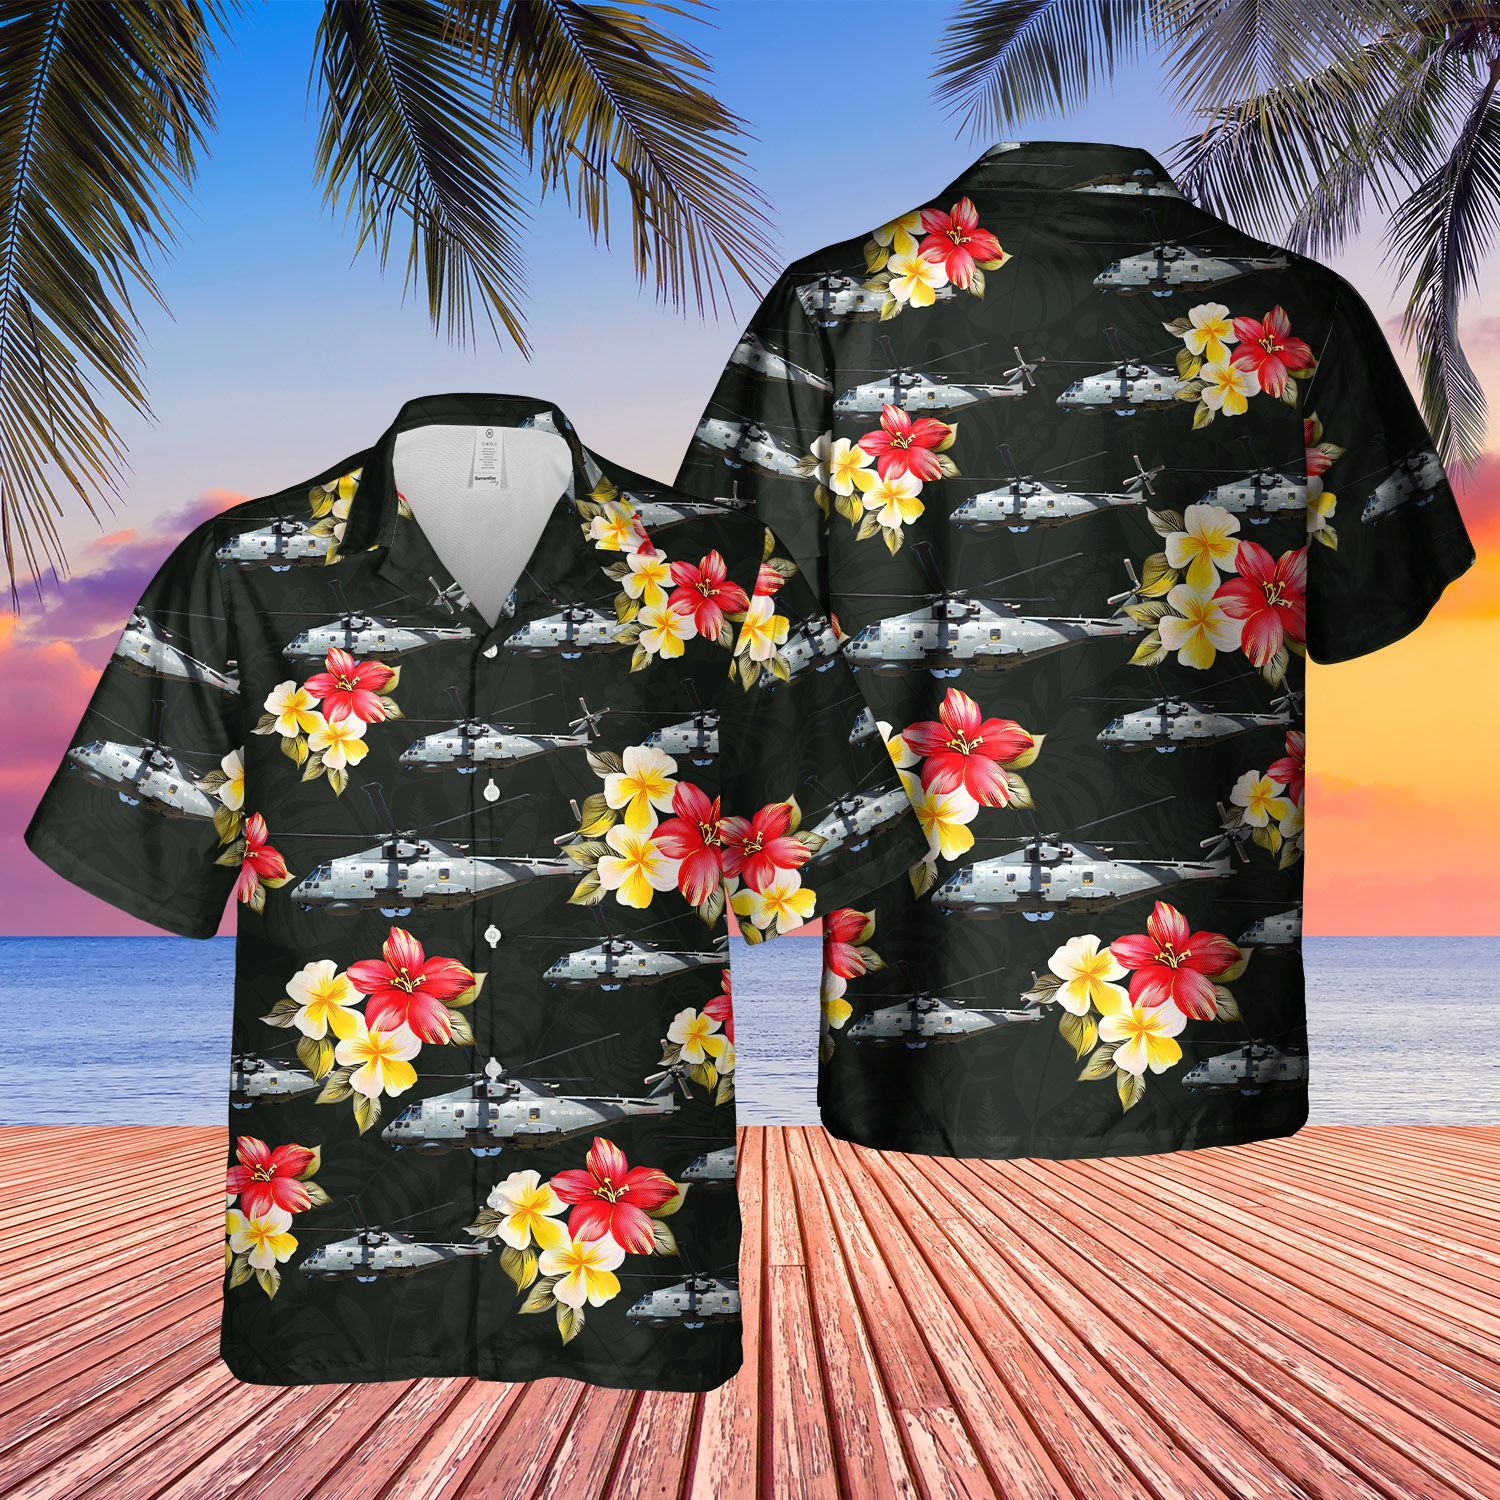 Royal Navy Merlin    Black Awesome Design Unisex Hawaiian Shirt For Men And Women Dhc17063307